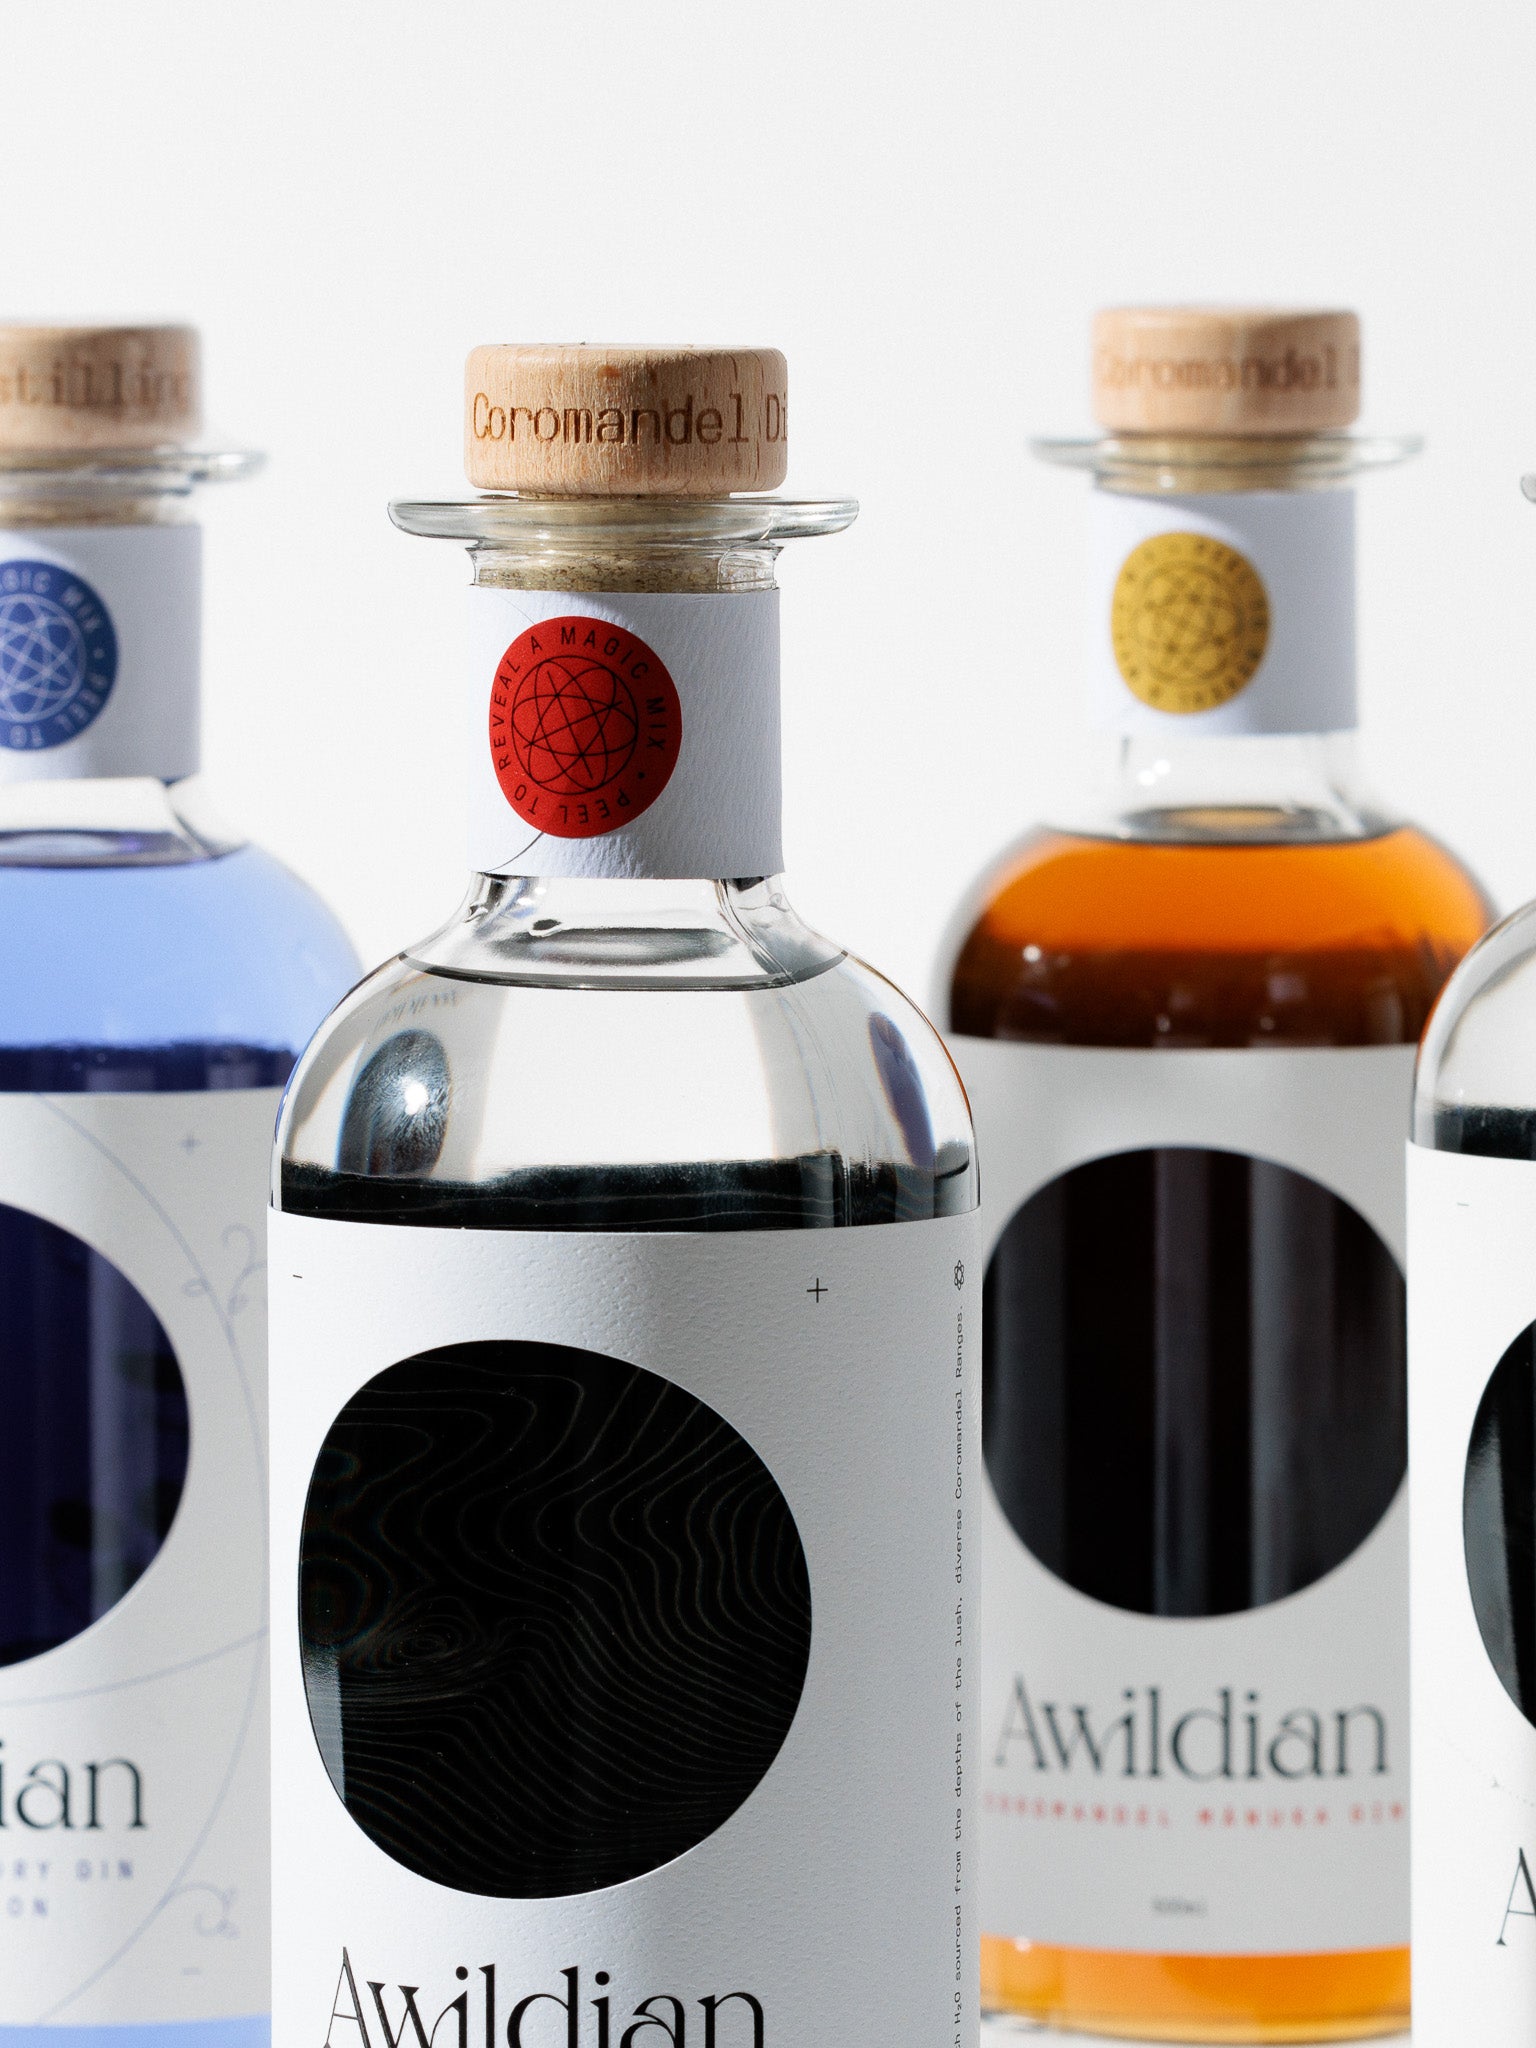 You can gift any Awildian gin from our range to your clients 